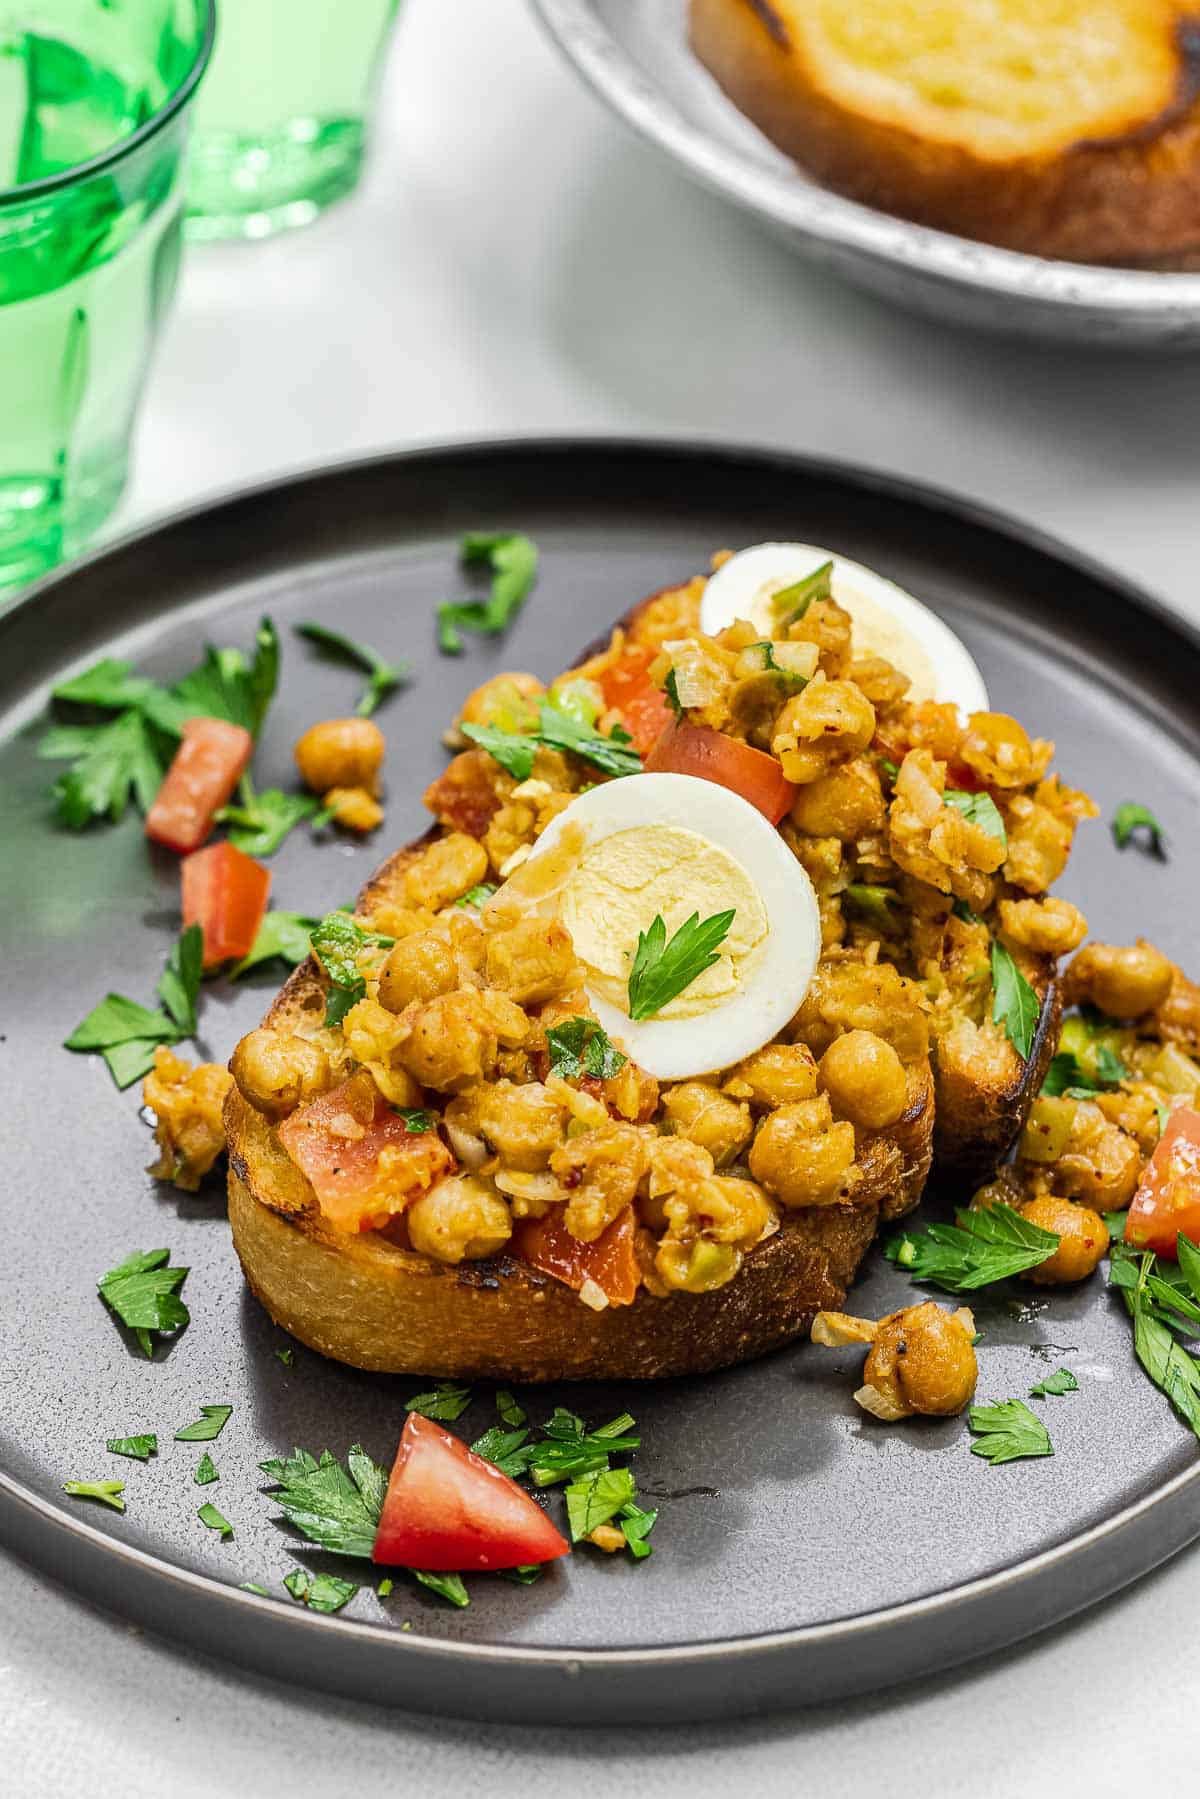 smashed chickpea topping on a slice of toast, topped with slices of boiled egg.